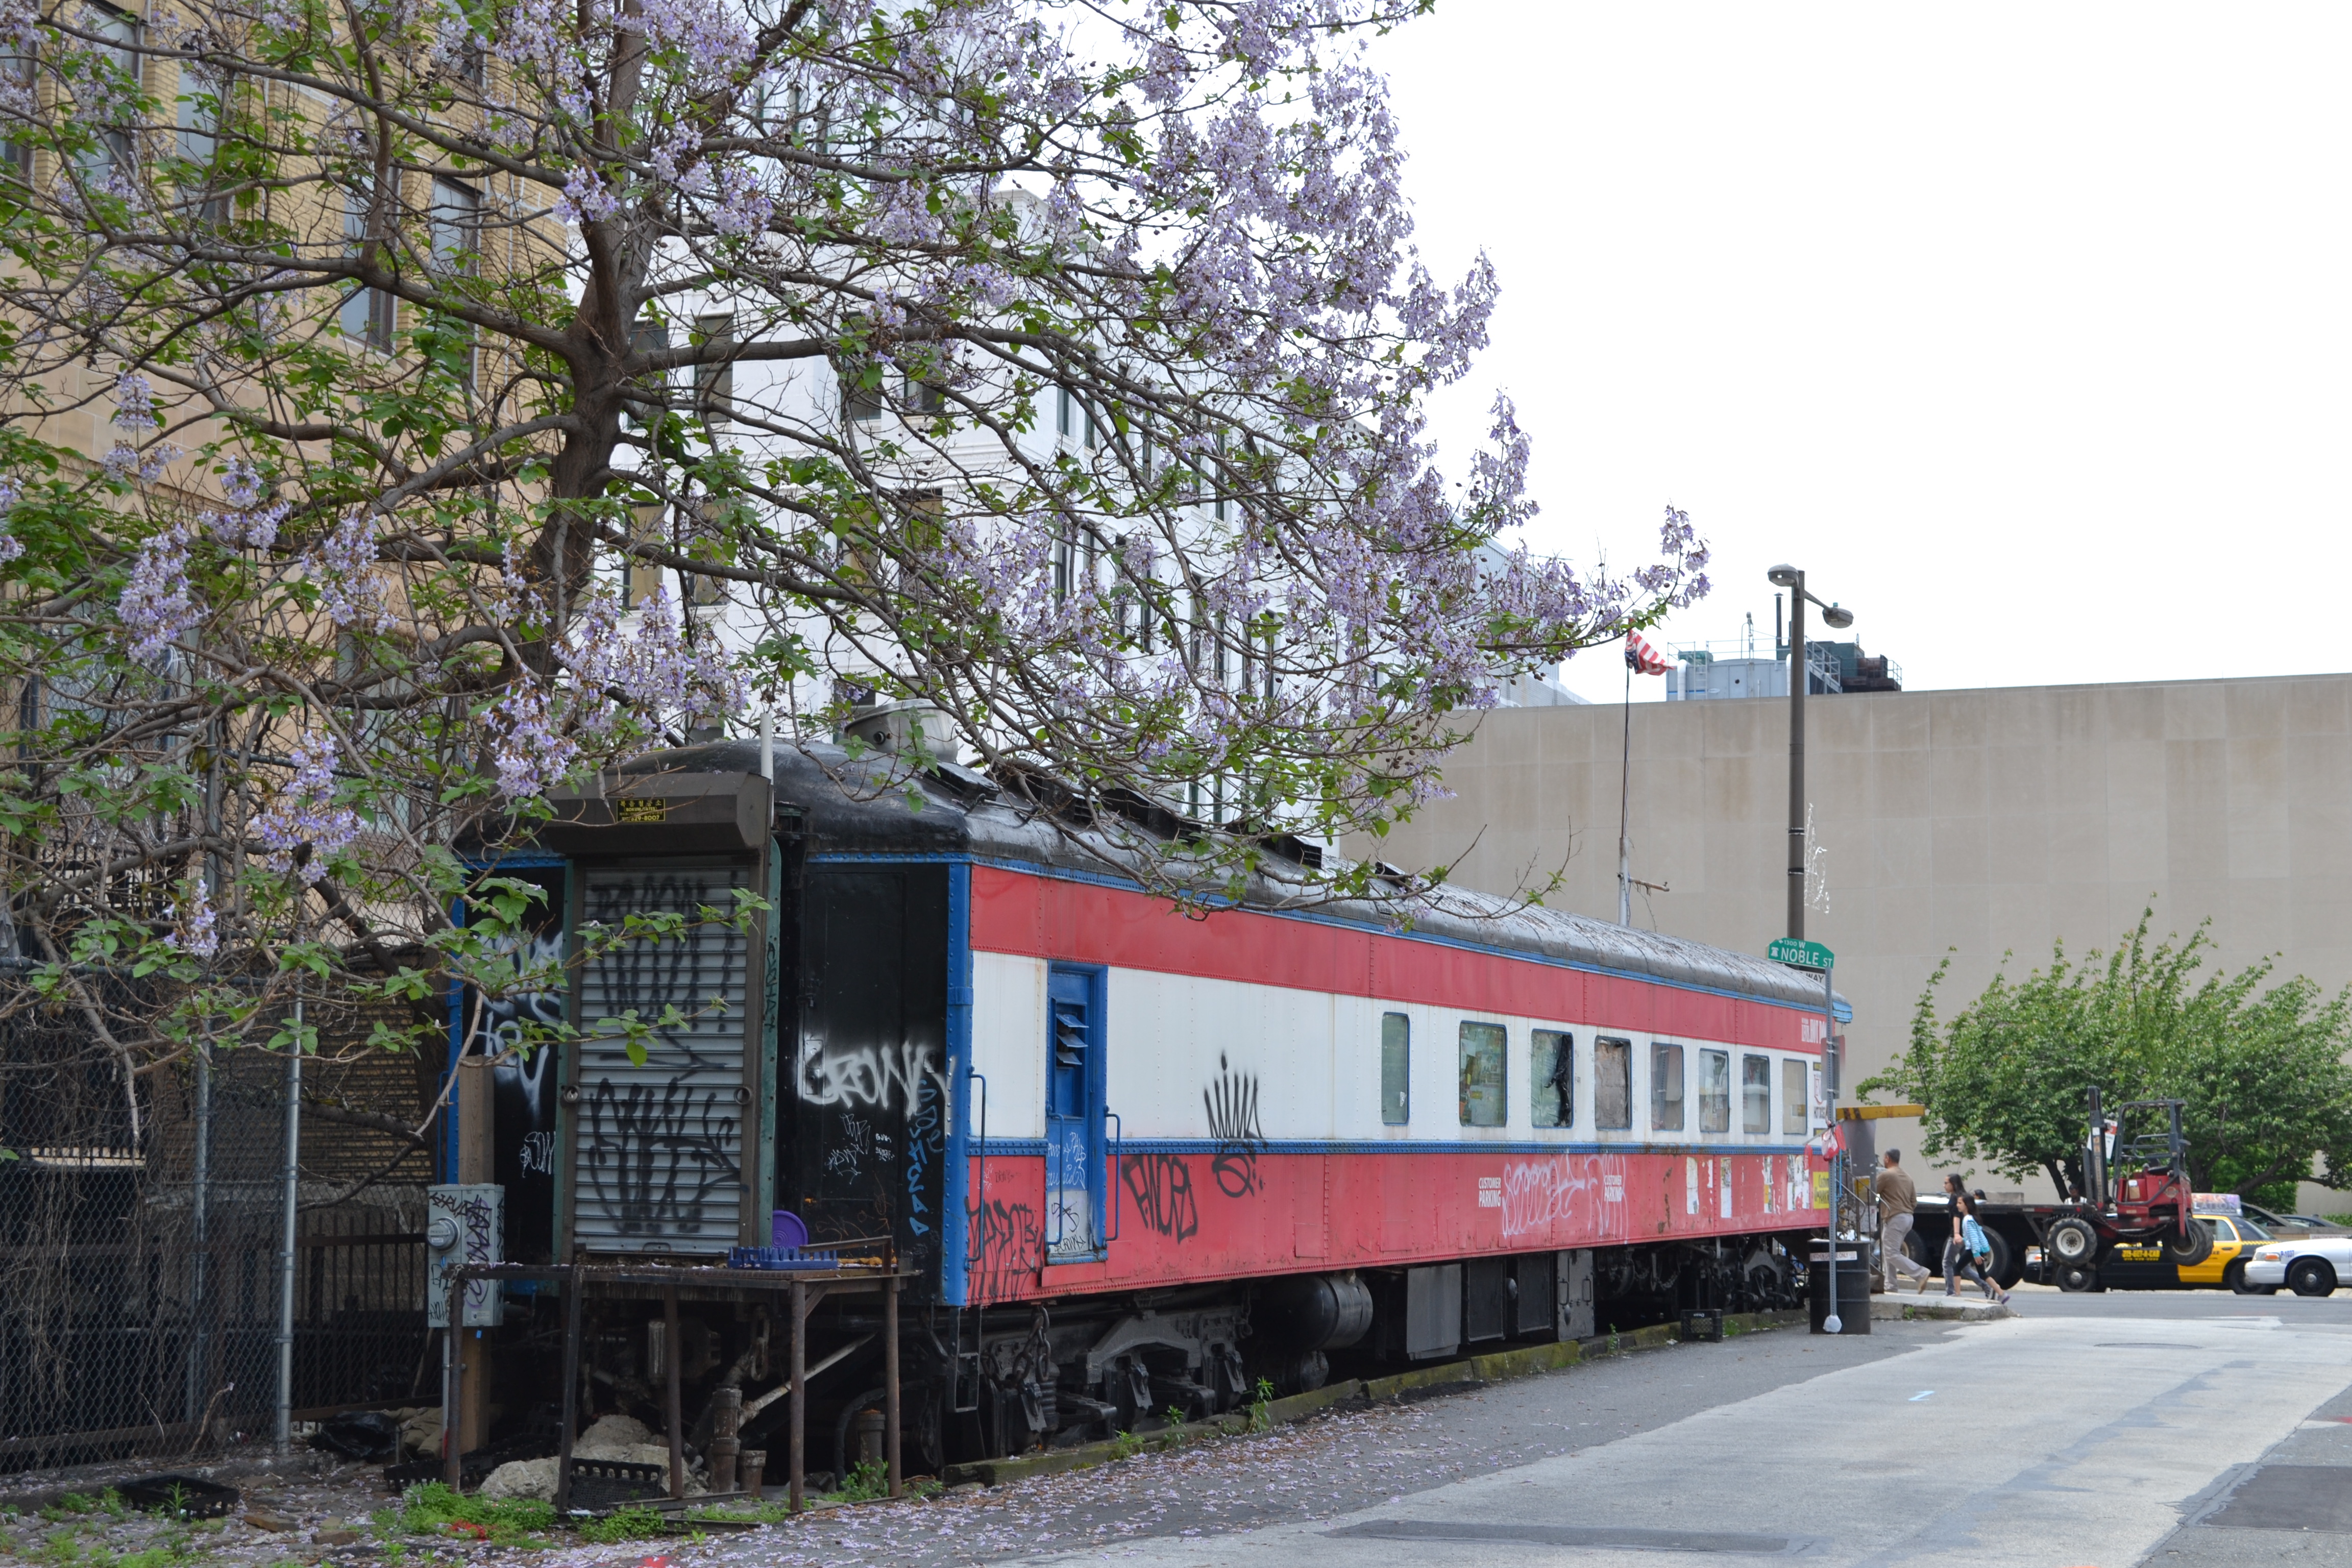 The abandoned train car diner sits at the northern end of the Broad Street bridge